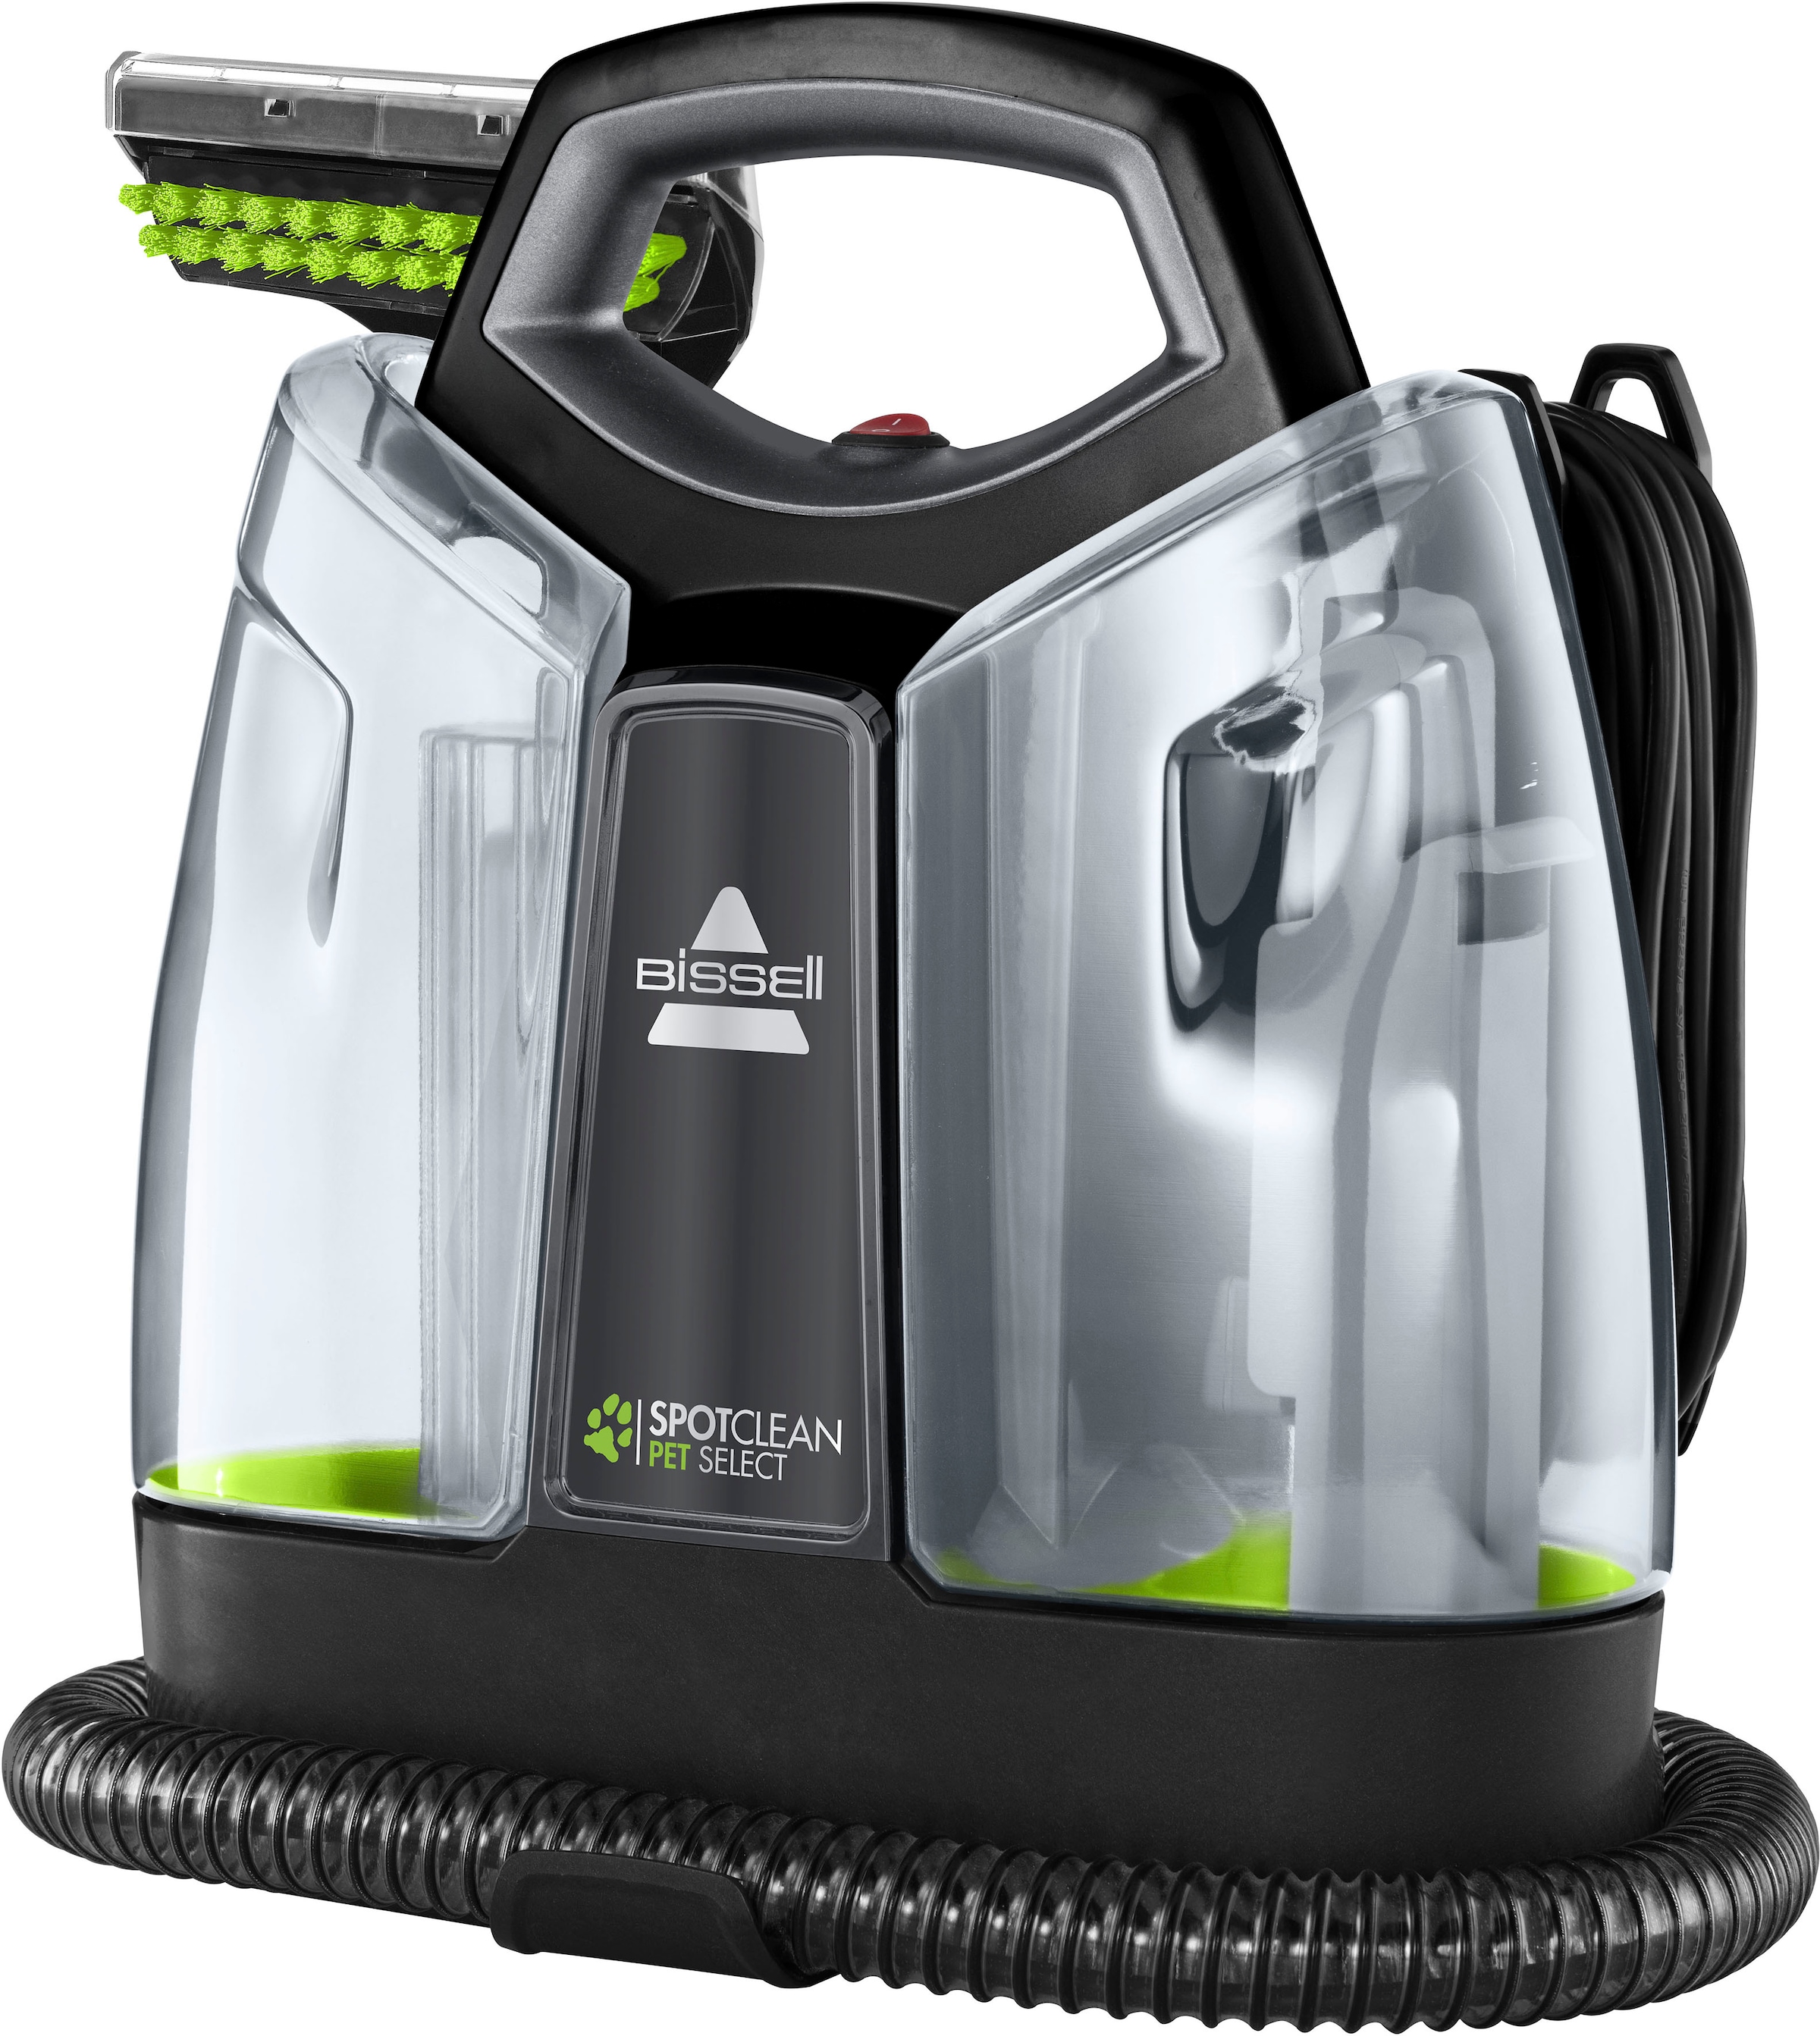 Bissell Little Green Multi-Purpose Portable Cleaner Review